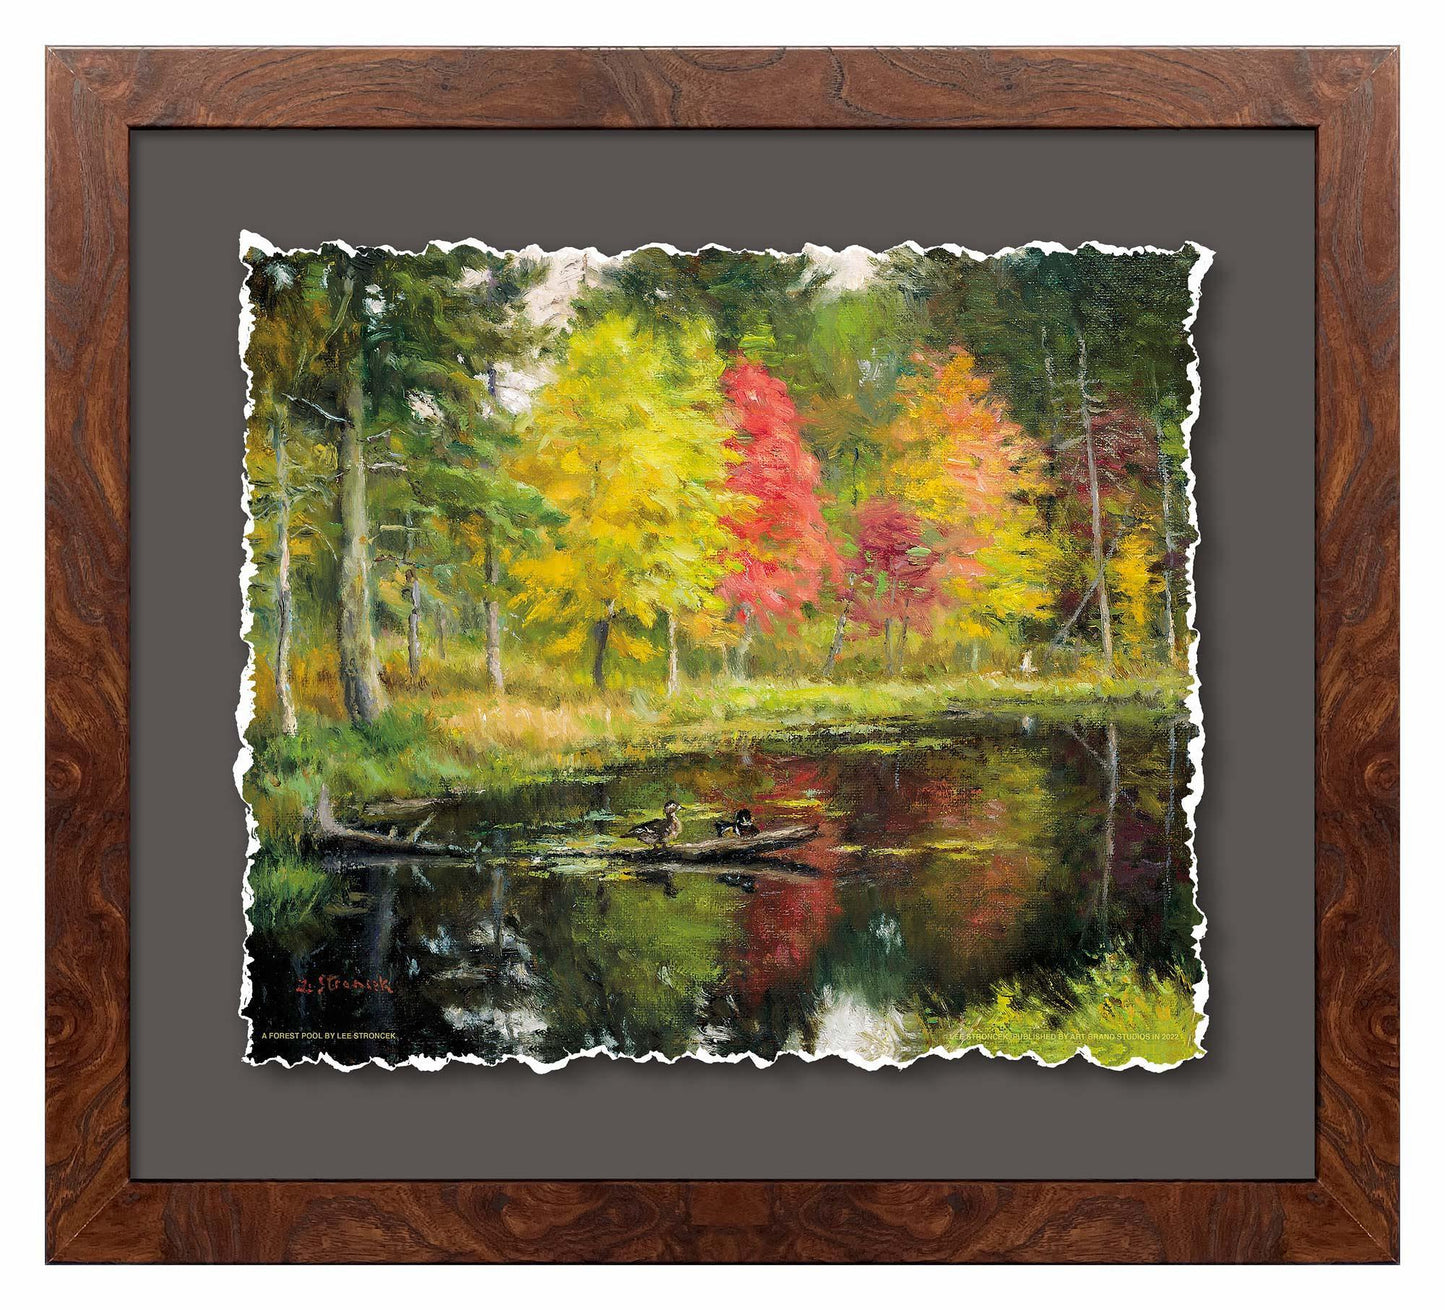 A Forest Pool—Wood Ducks Deckled Edge Paper Print - Wild Wings